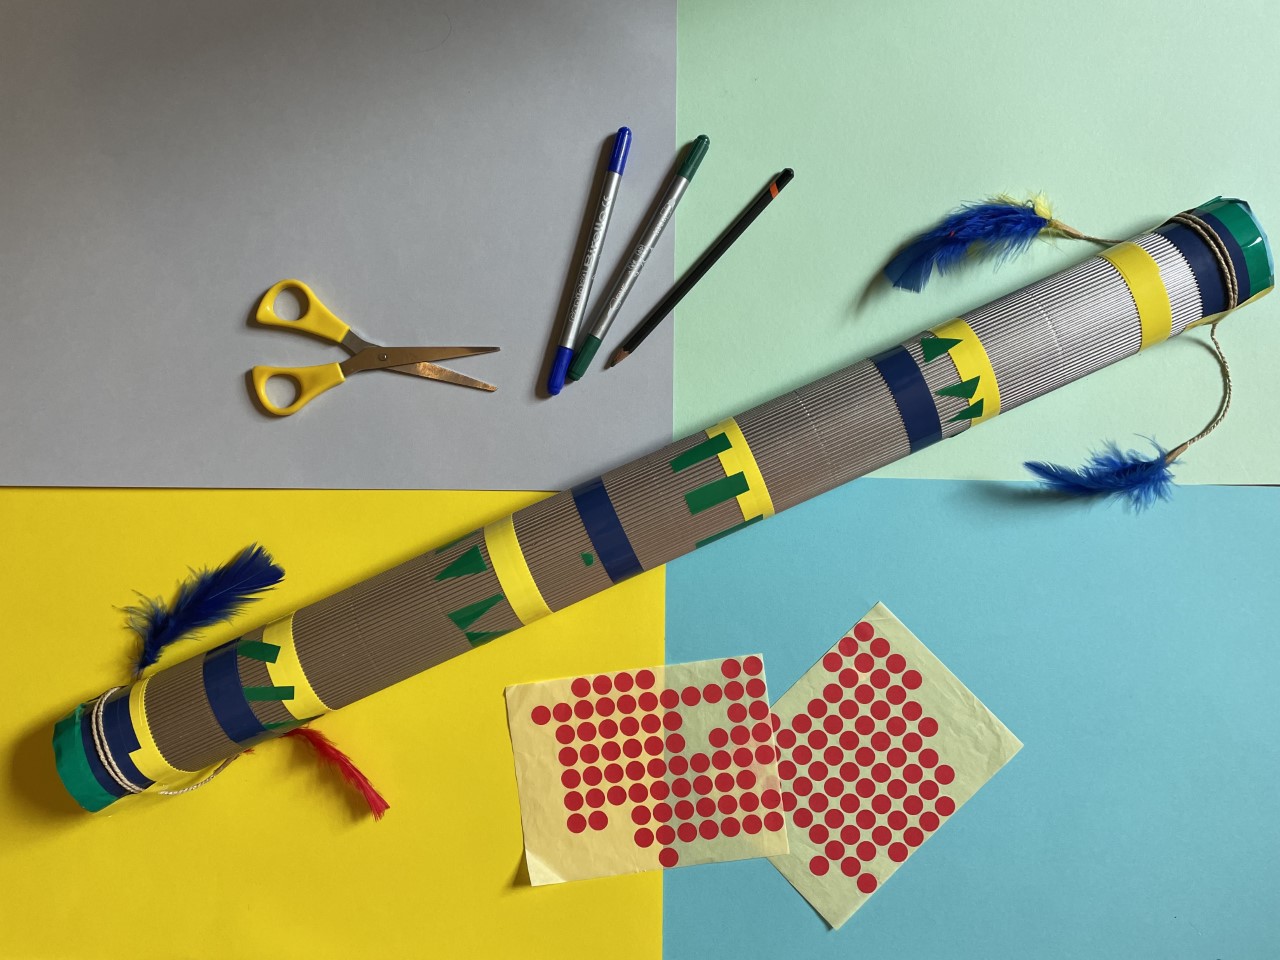 Craft materials used to create the rainstick including scissors, pens, tubes and dots